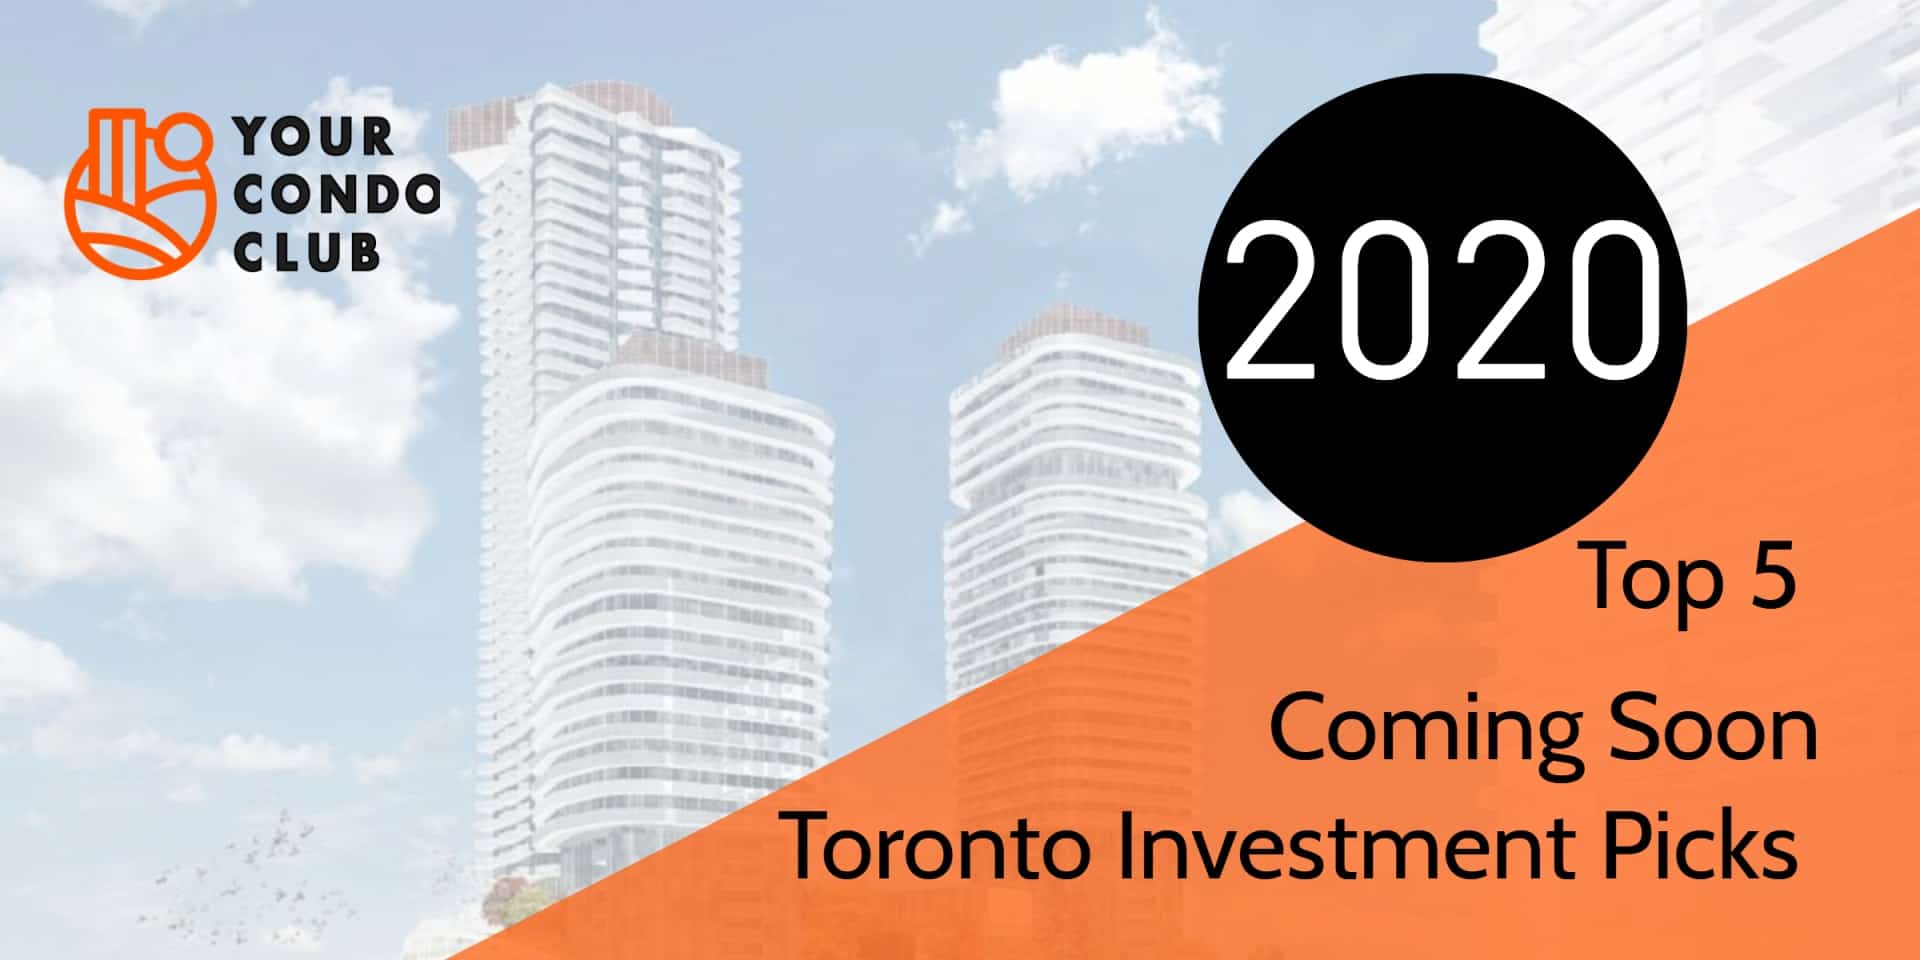 Top 5 Coming Soon Toronto Investment Picks for 2020